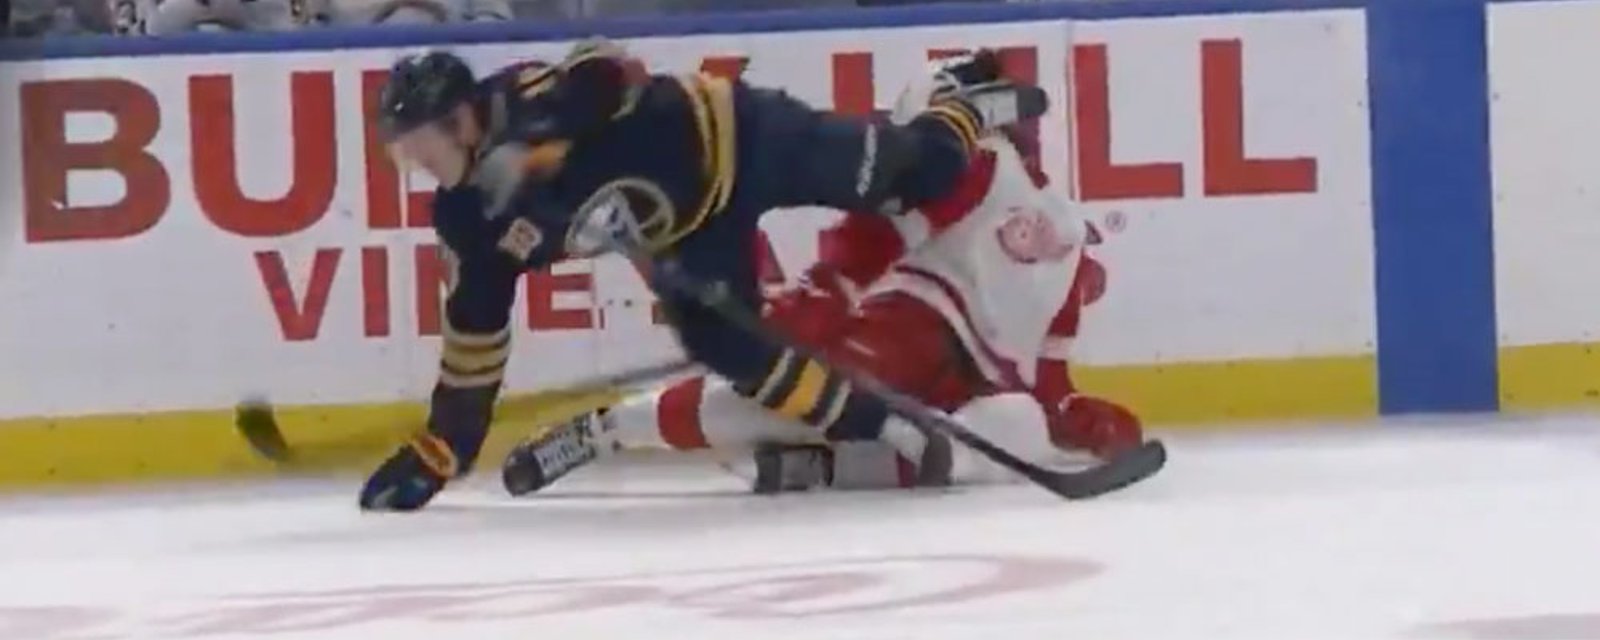 Wings Perlini’s face gets sliced open by skate blade! 